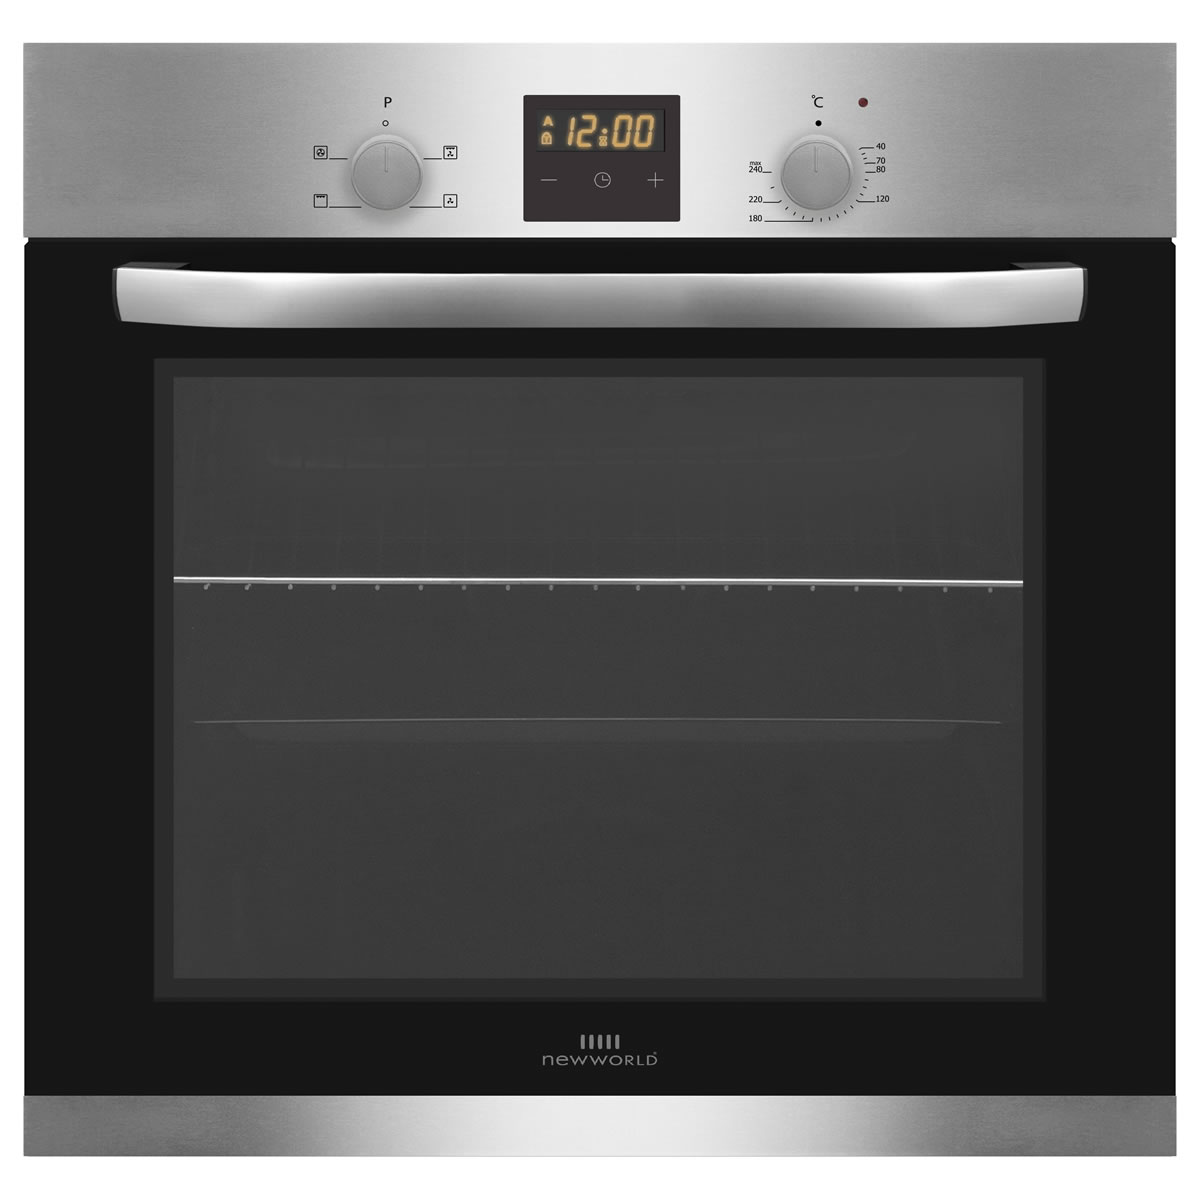 New-World Built-in Multi-Function Single Electric Oven Inox